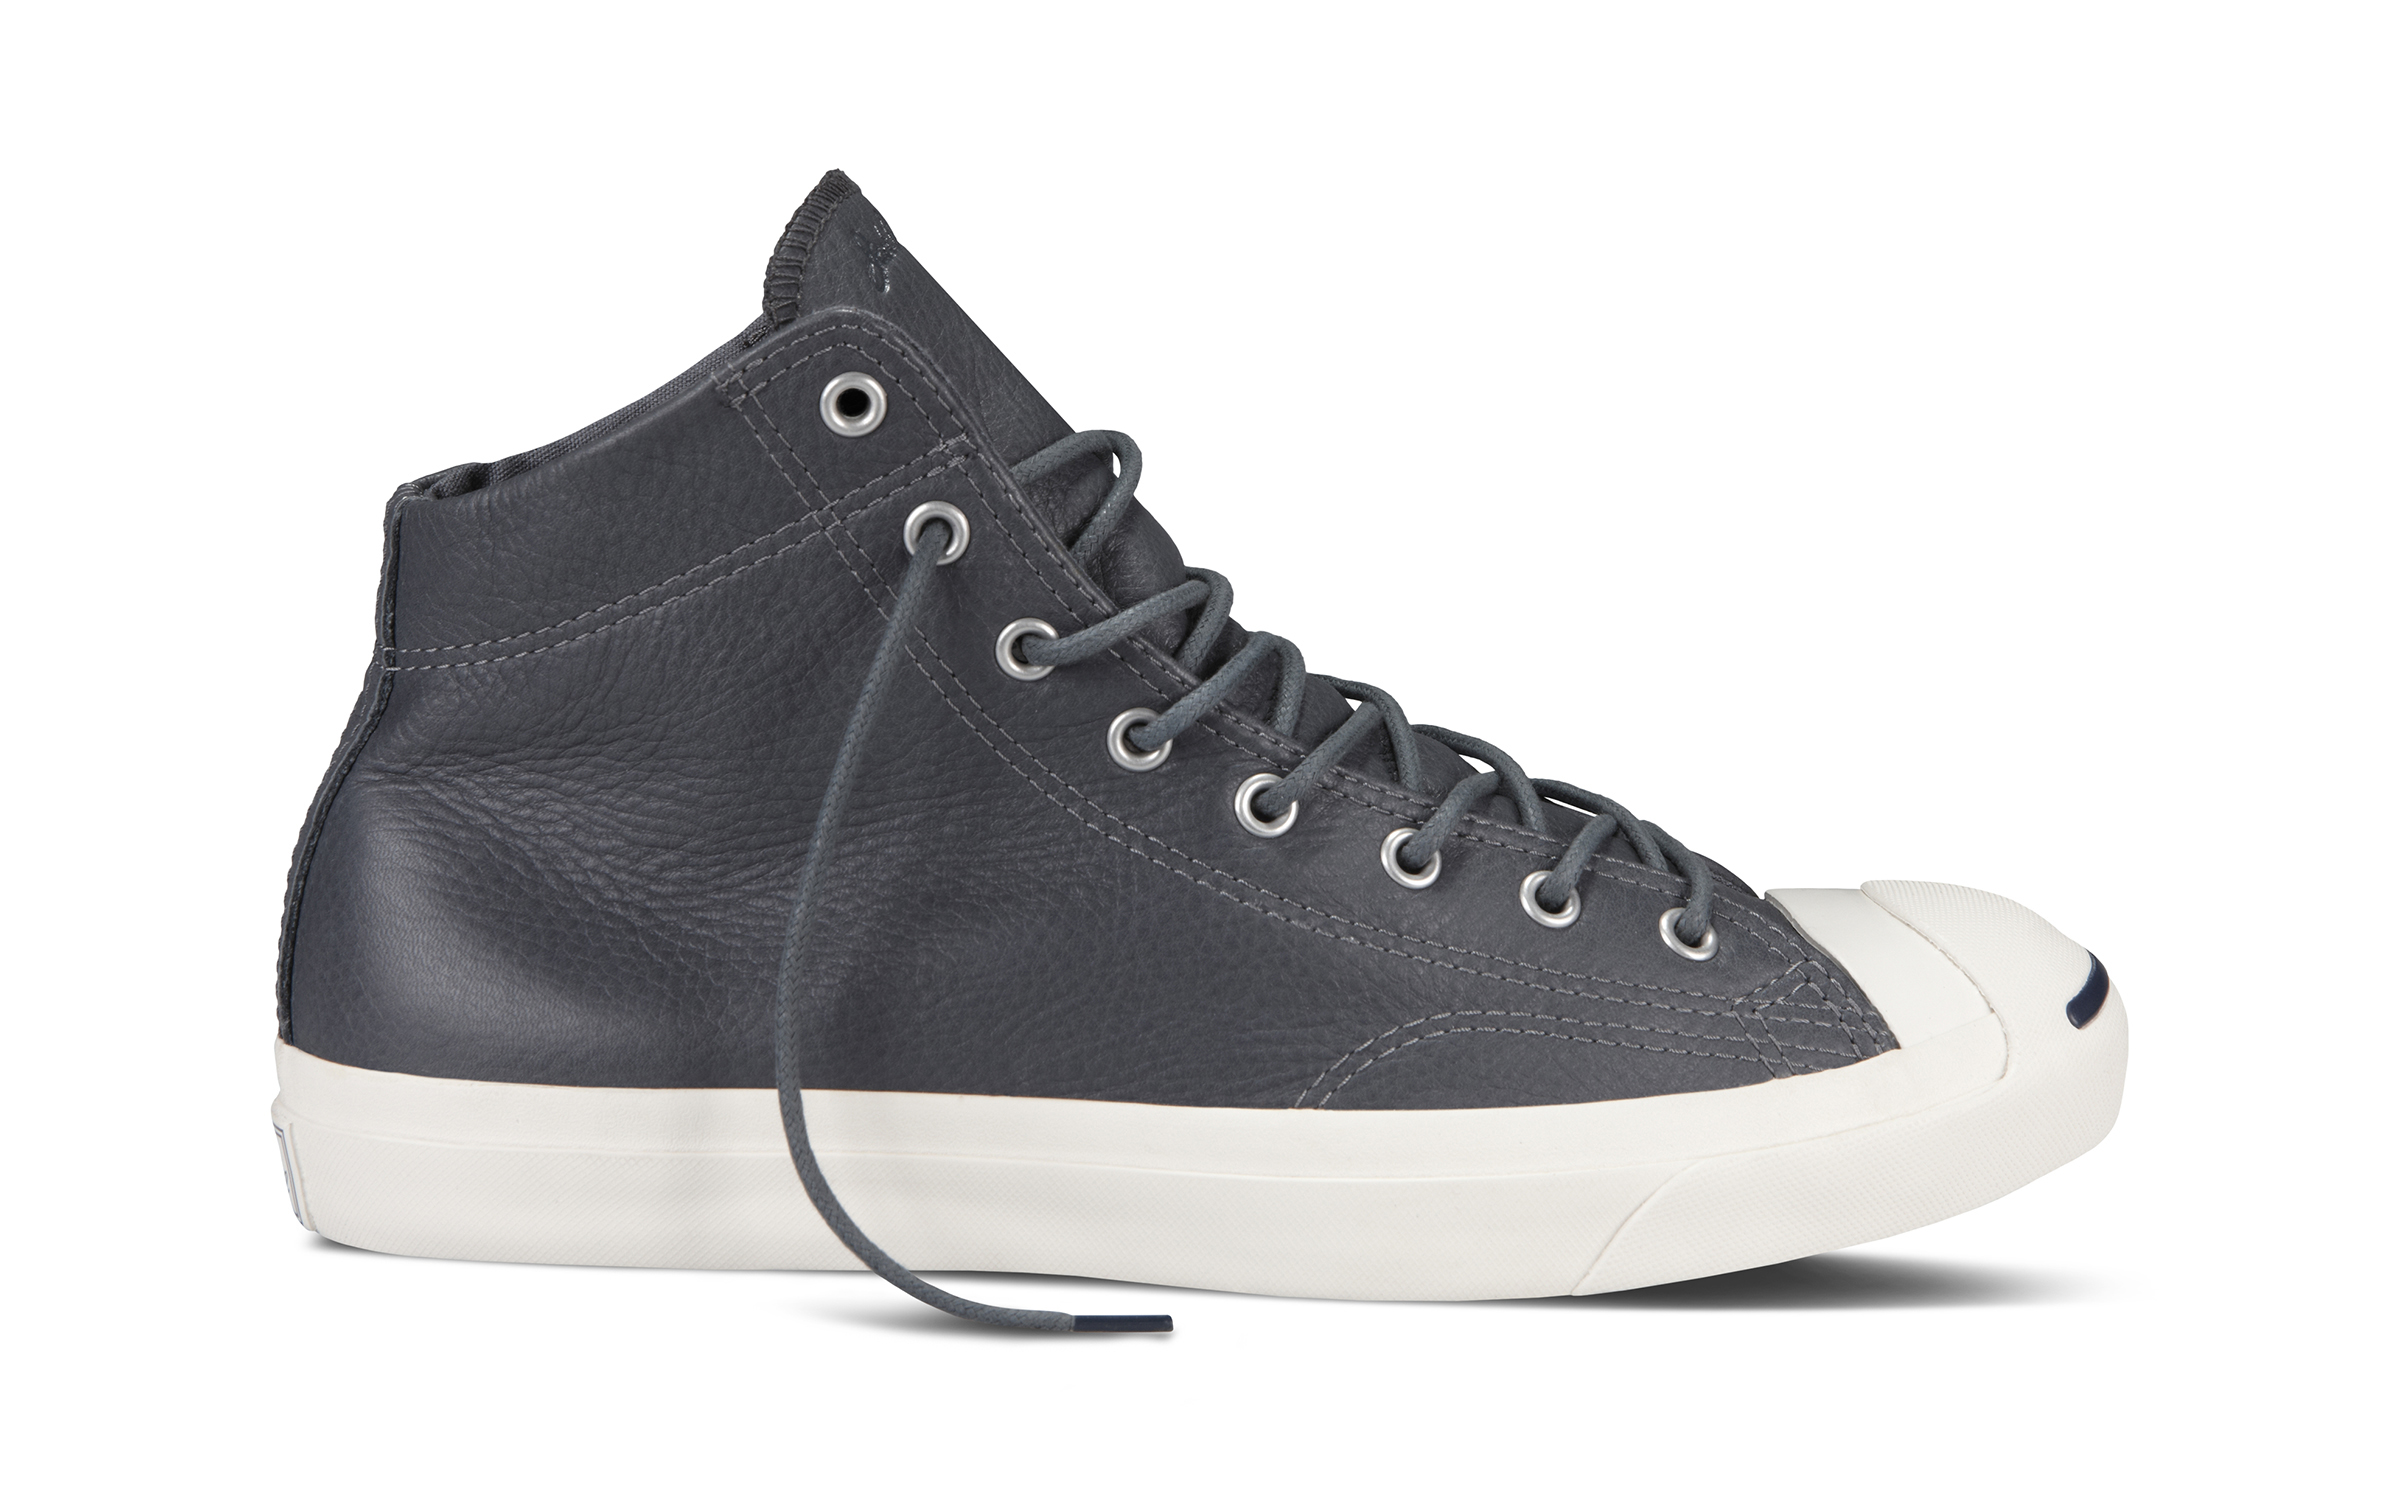 Converse Fall 2014 Jack Purcell 04